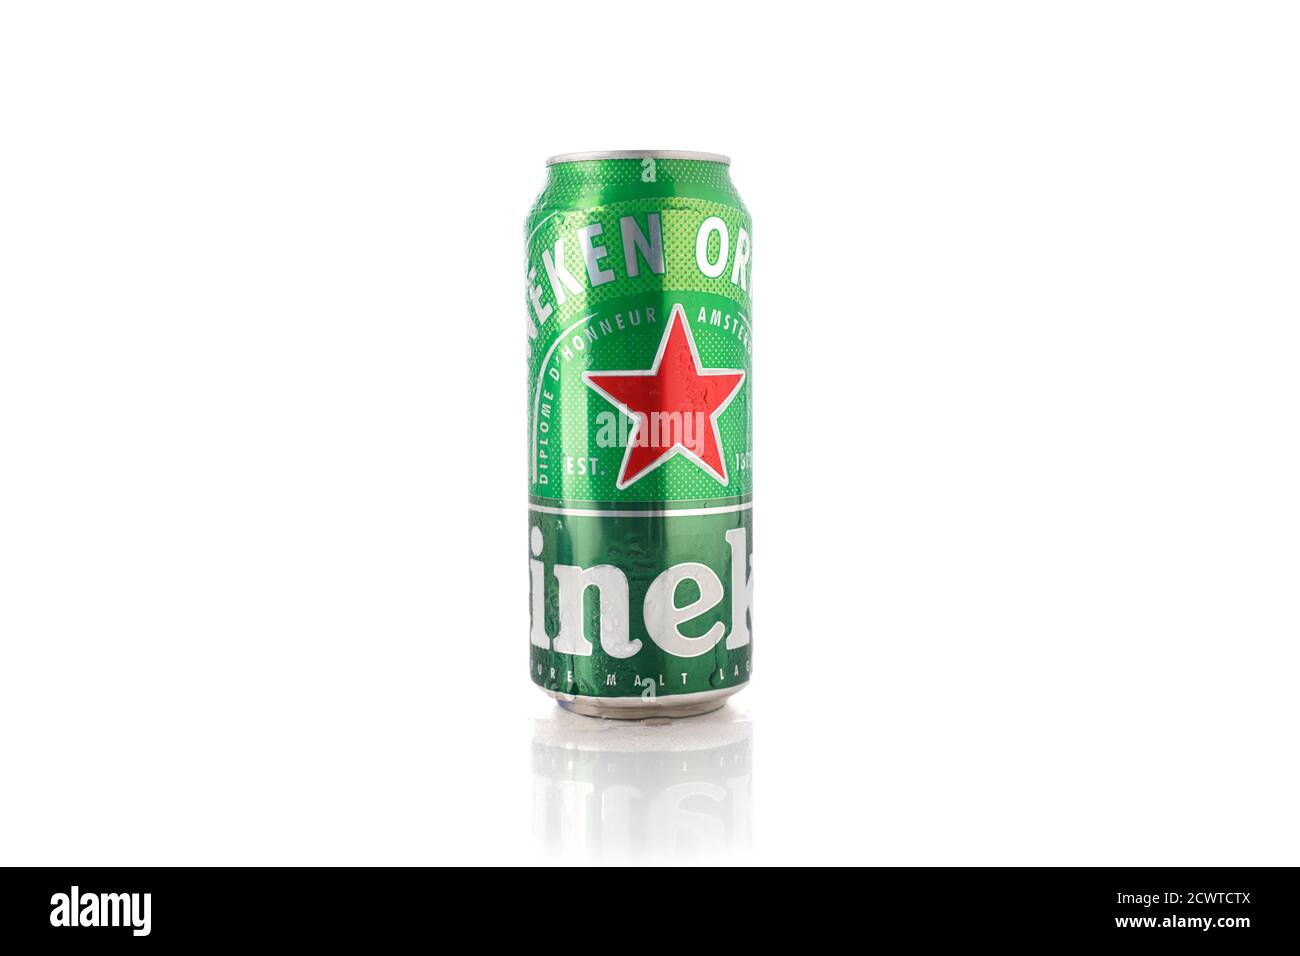 Heineken beer can isolated on white background. Alcoholic beverage. Stock Photo